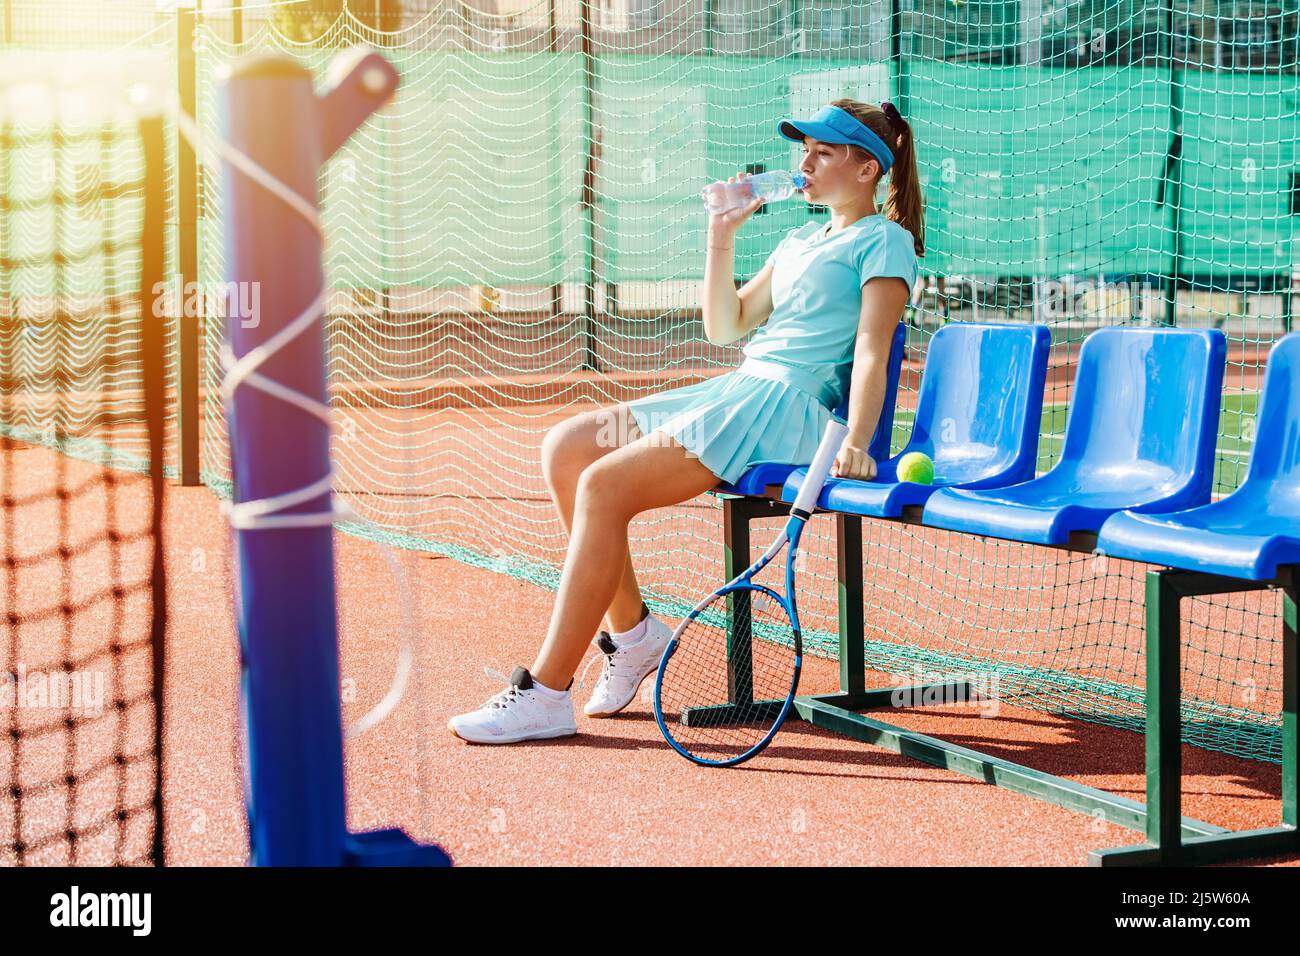 Exhausted thirsty girl resting on a plastic chair bench on an outdoor tennis court. Lit by an evening sun. High net behind her. Stock Photo